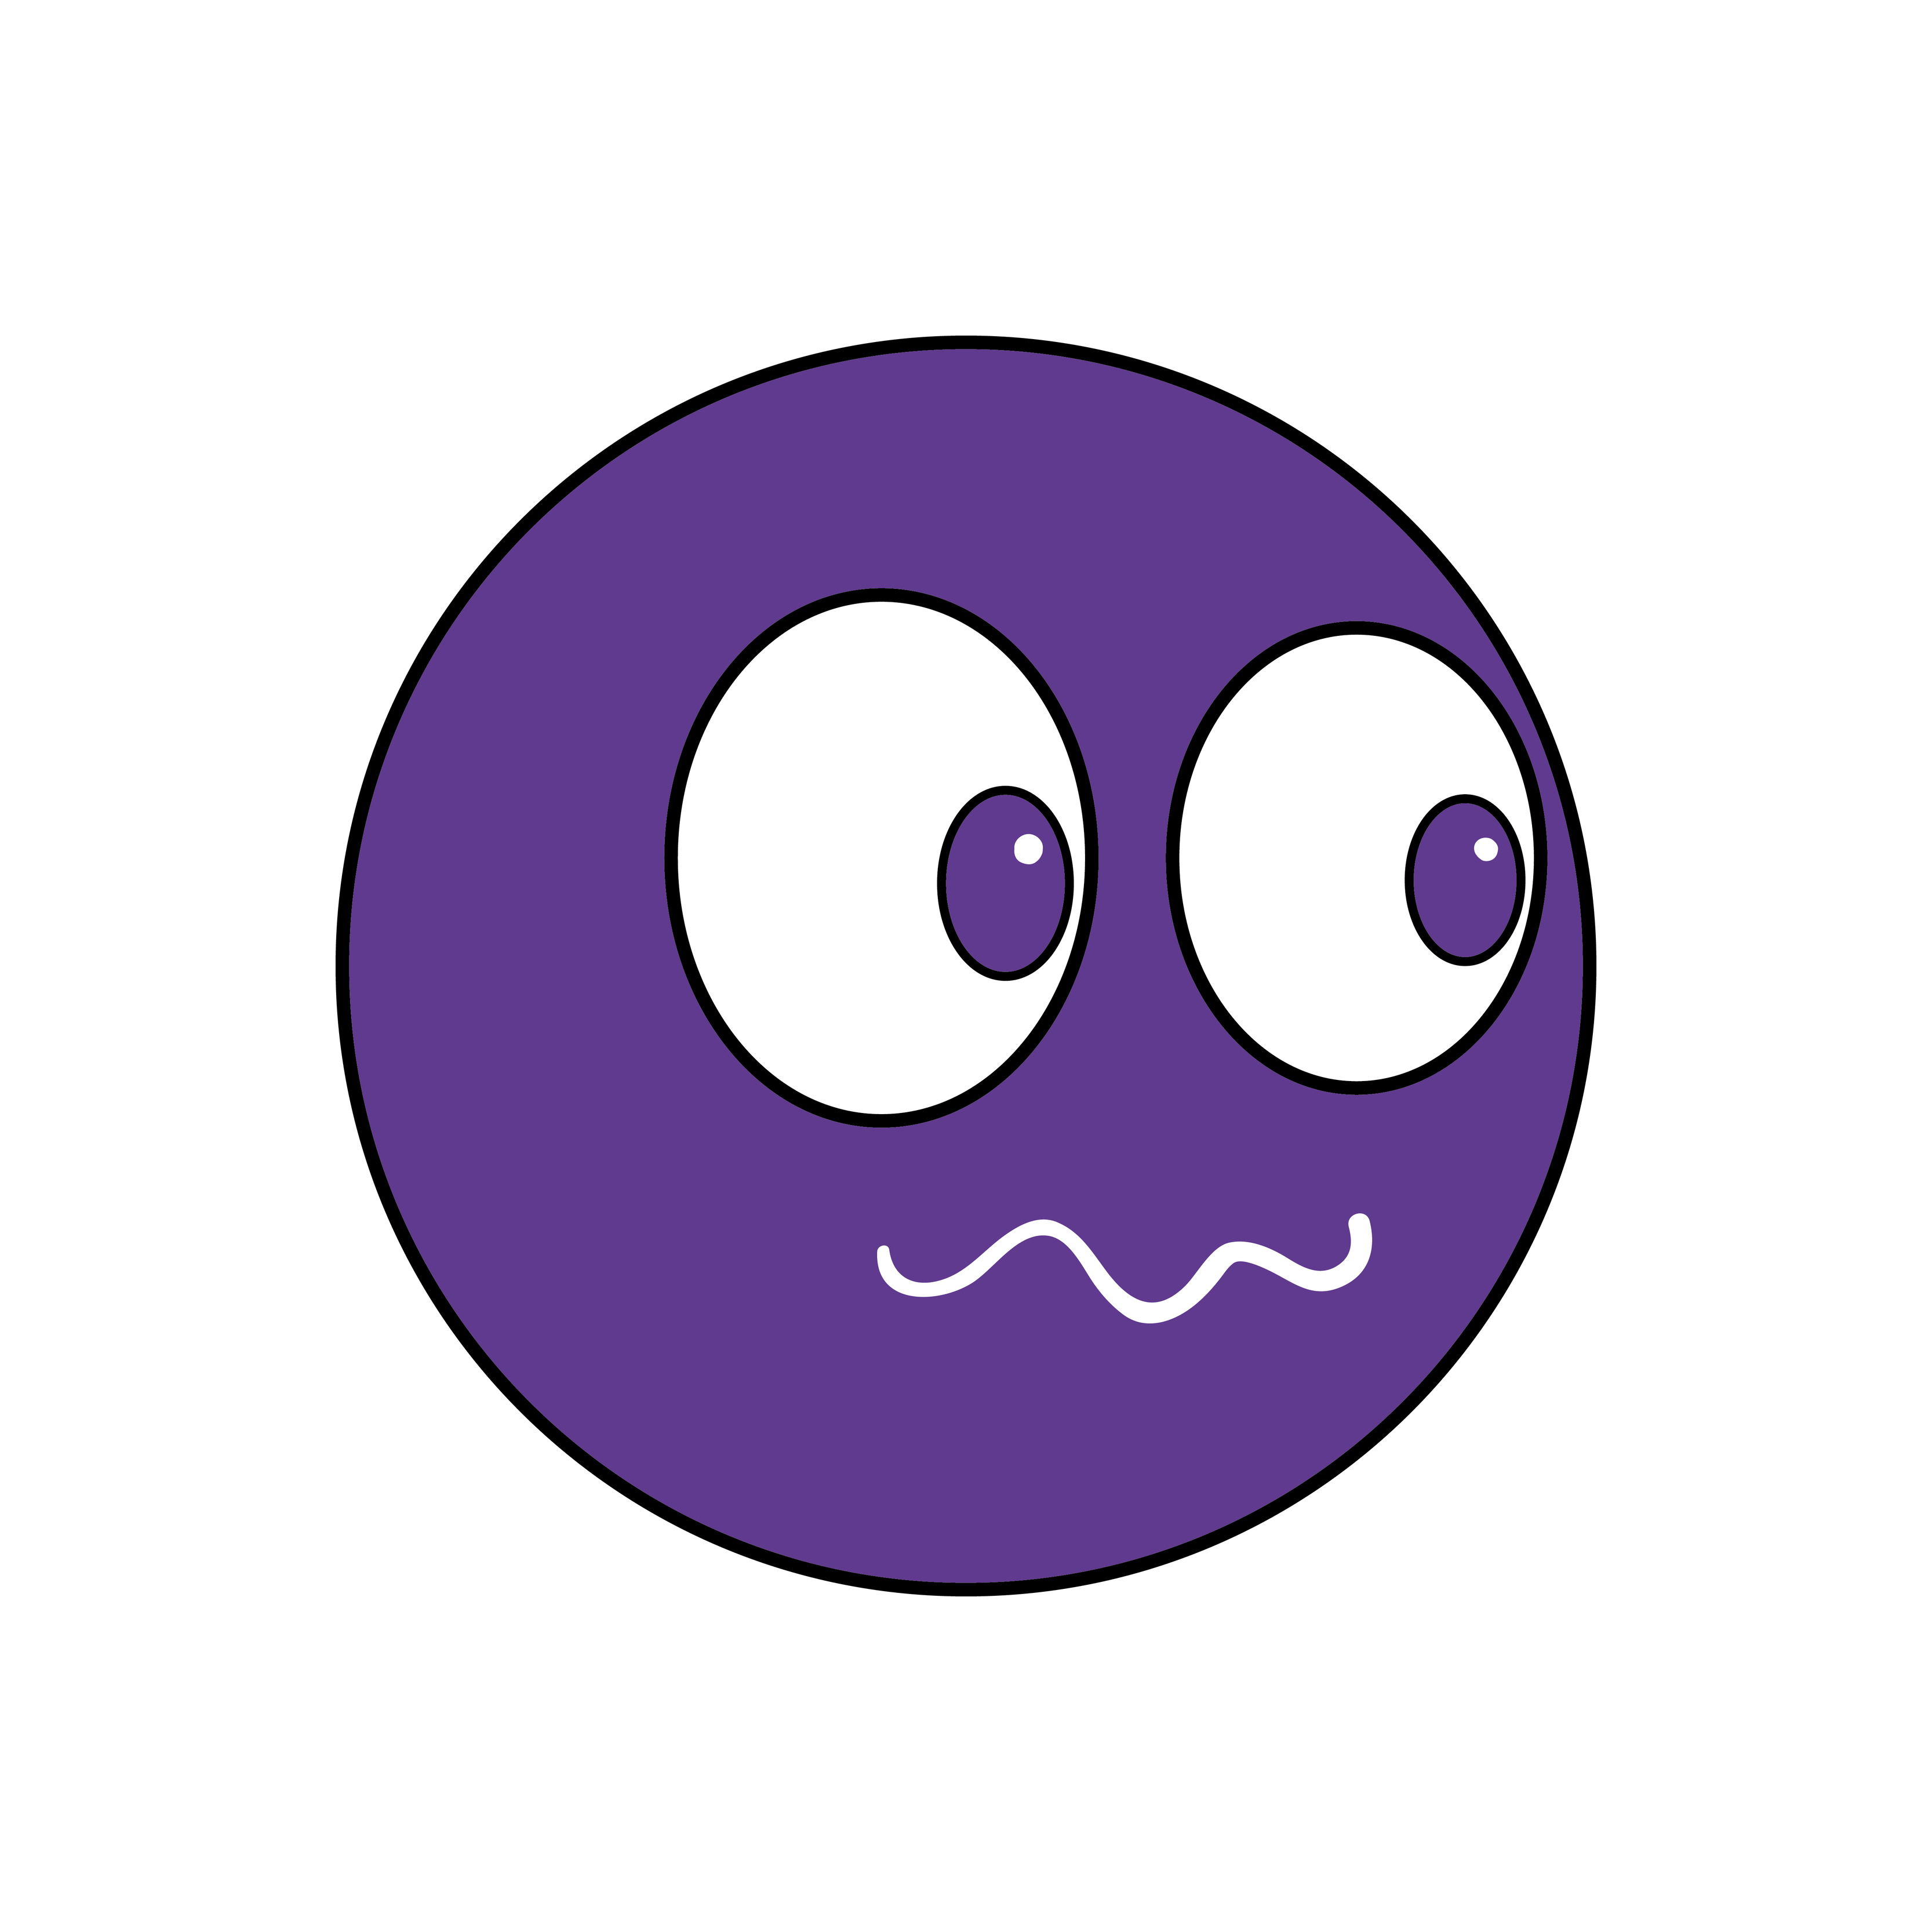 Cartoon face vector icon, surprised, frightened or worry emoji